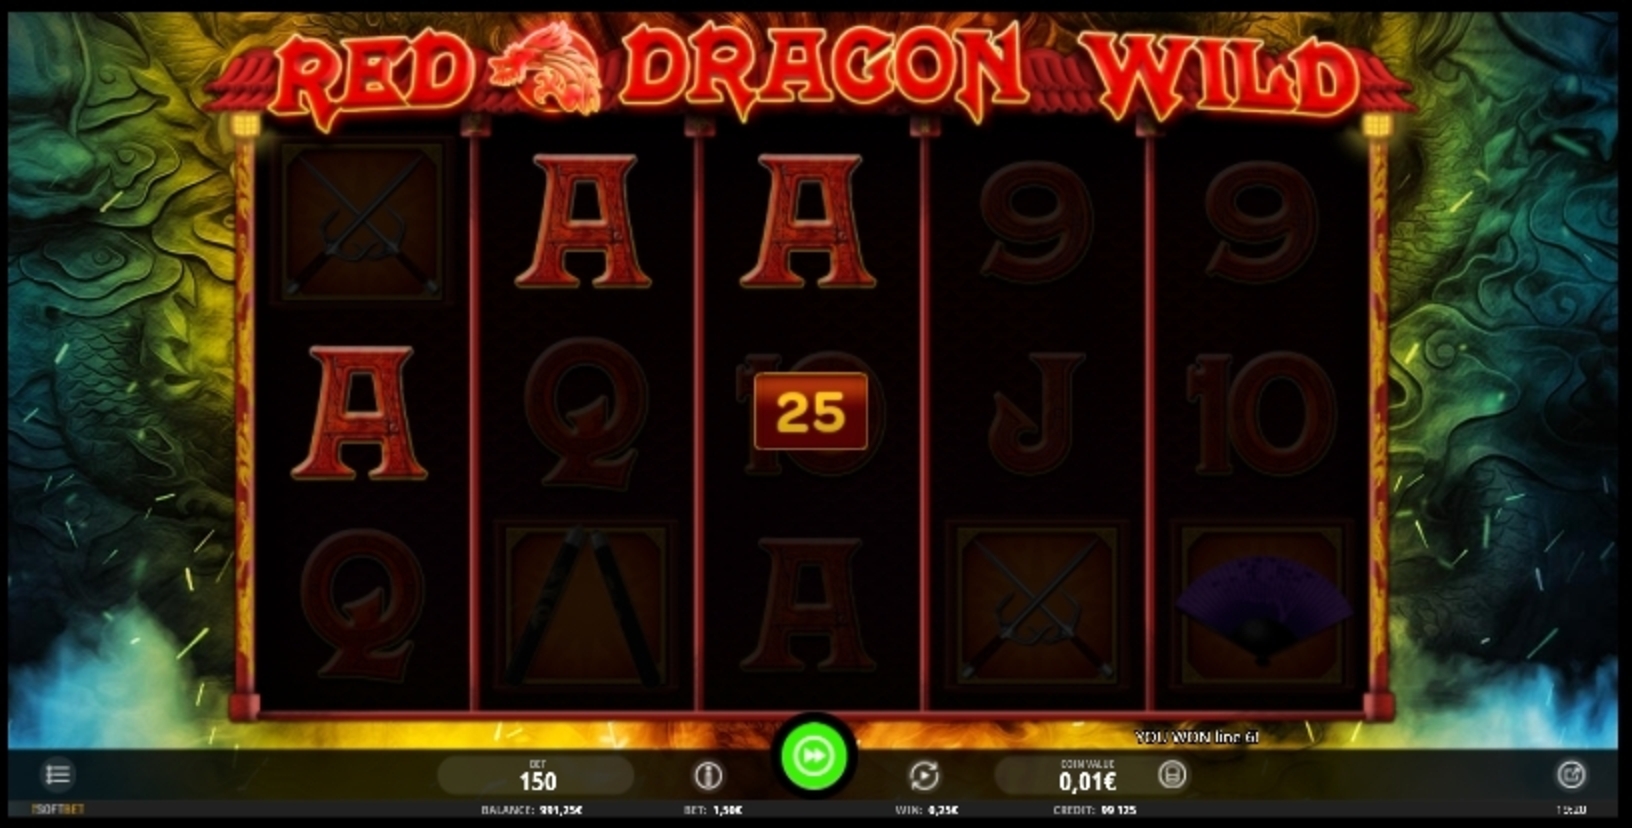 Win Money in Red Dragon Wild Free Slot Game by iSoftBet